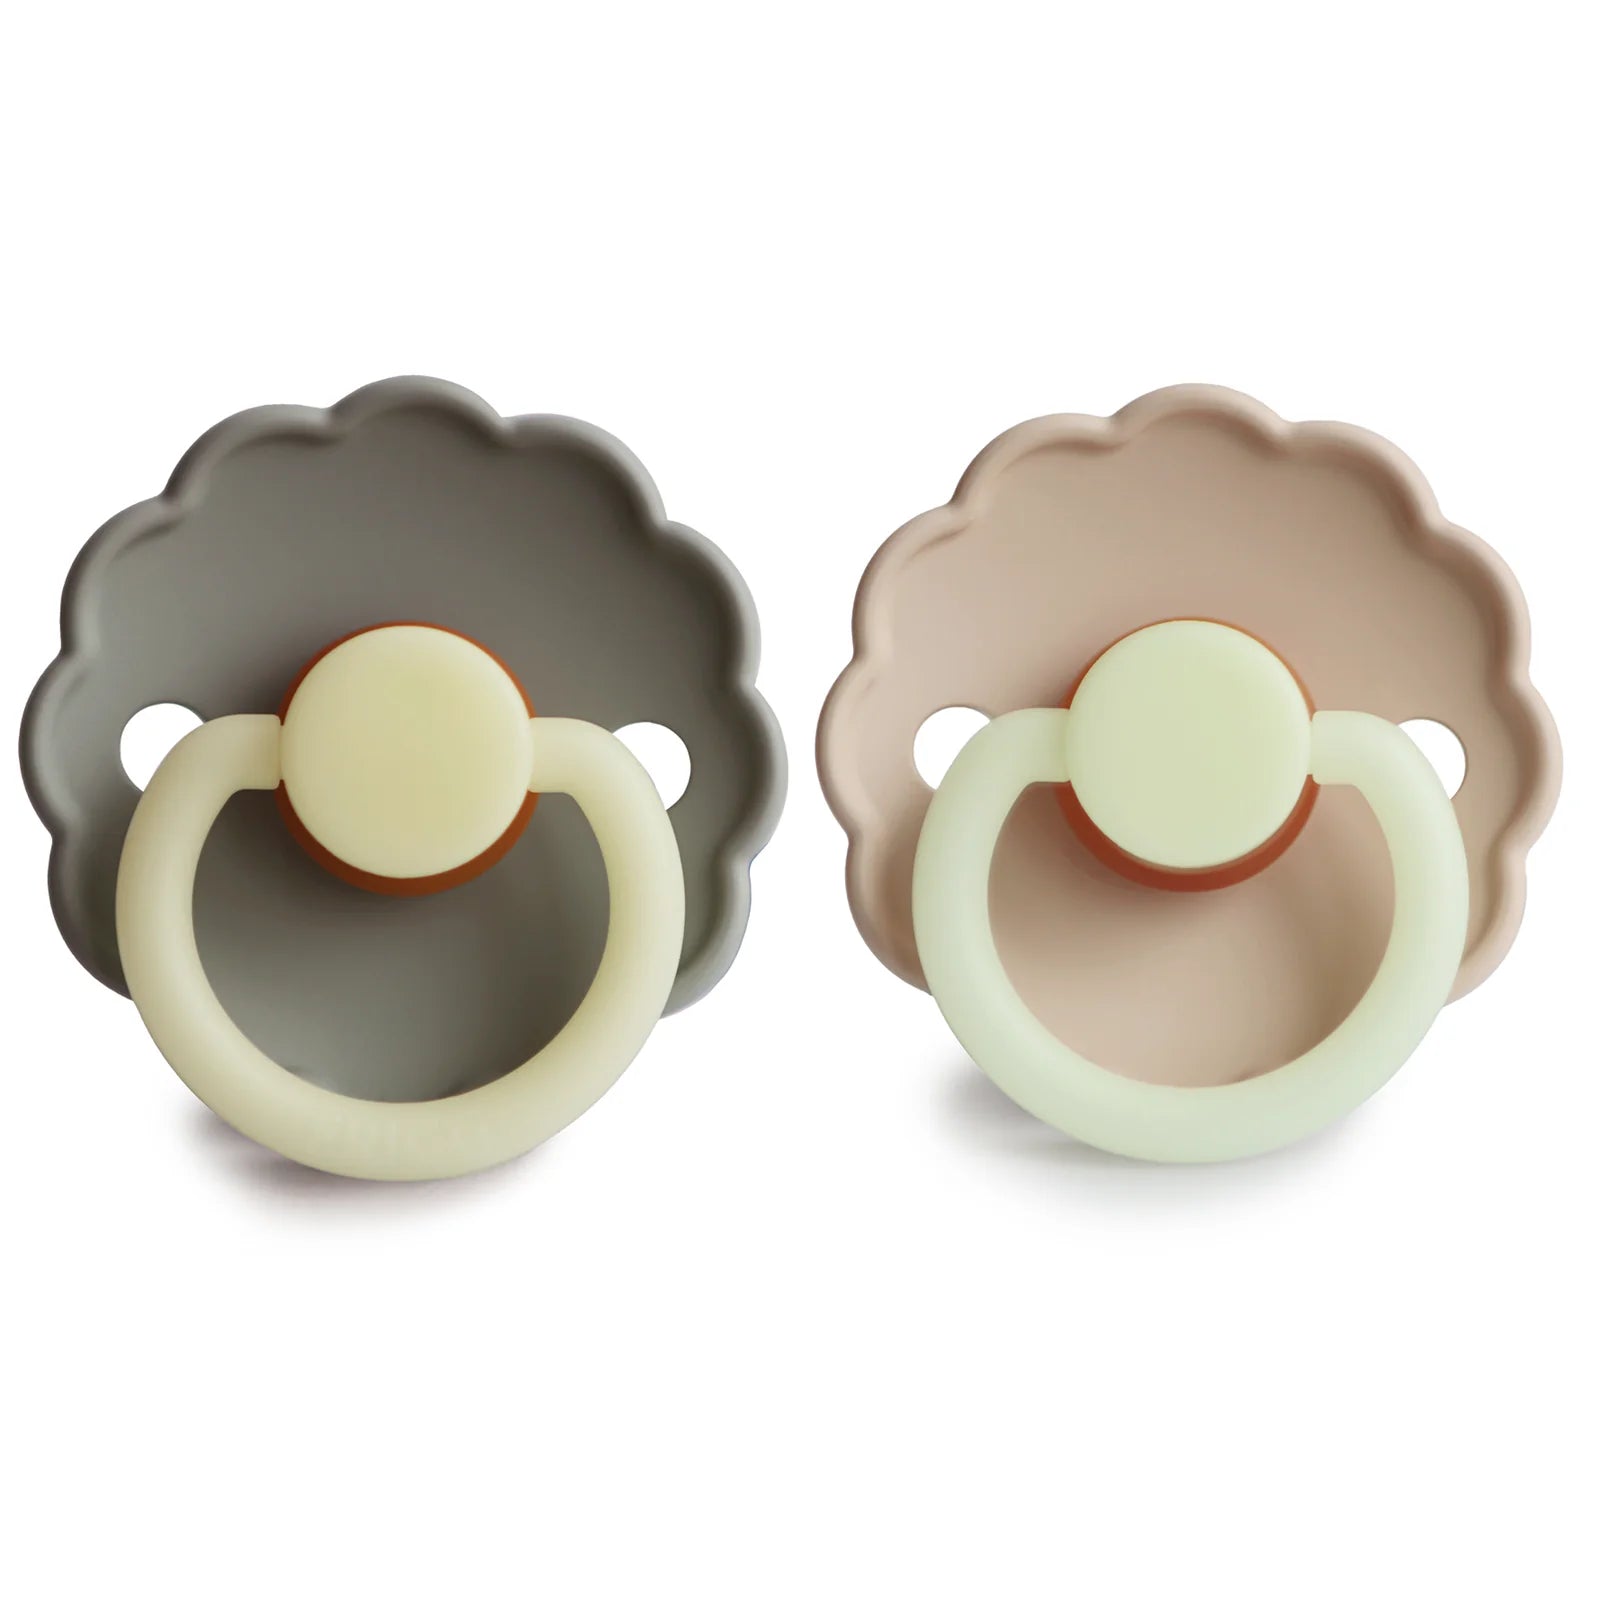 FRIGG DAISY NIGHT Pacifier - Pack of 2